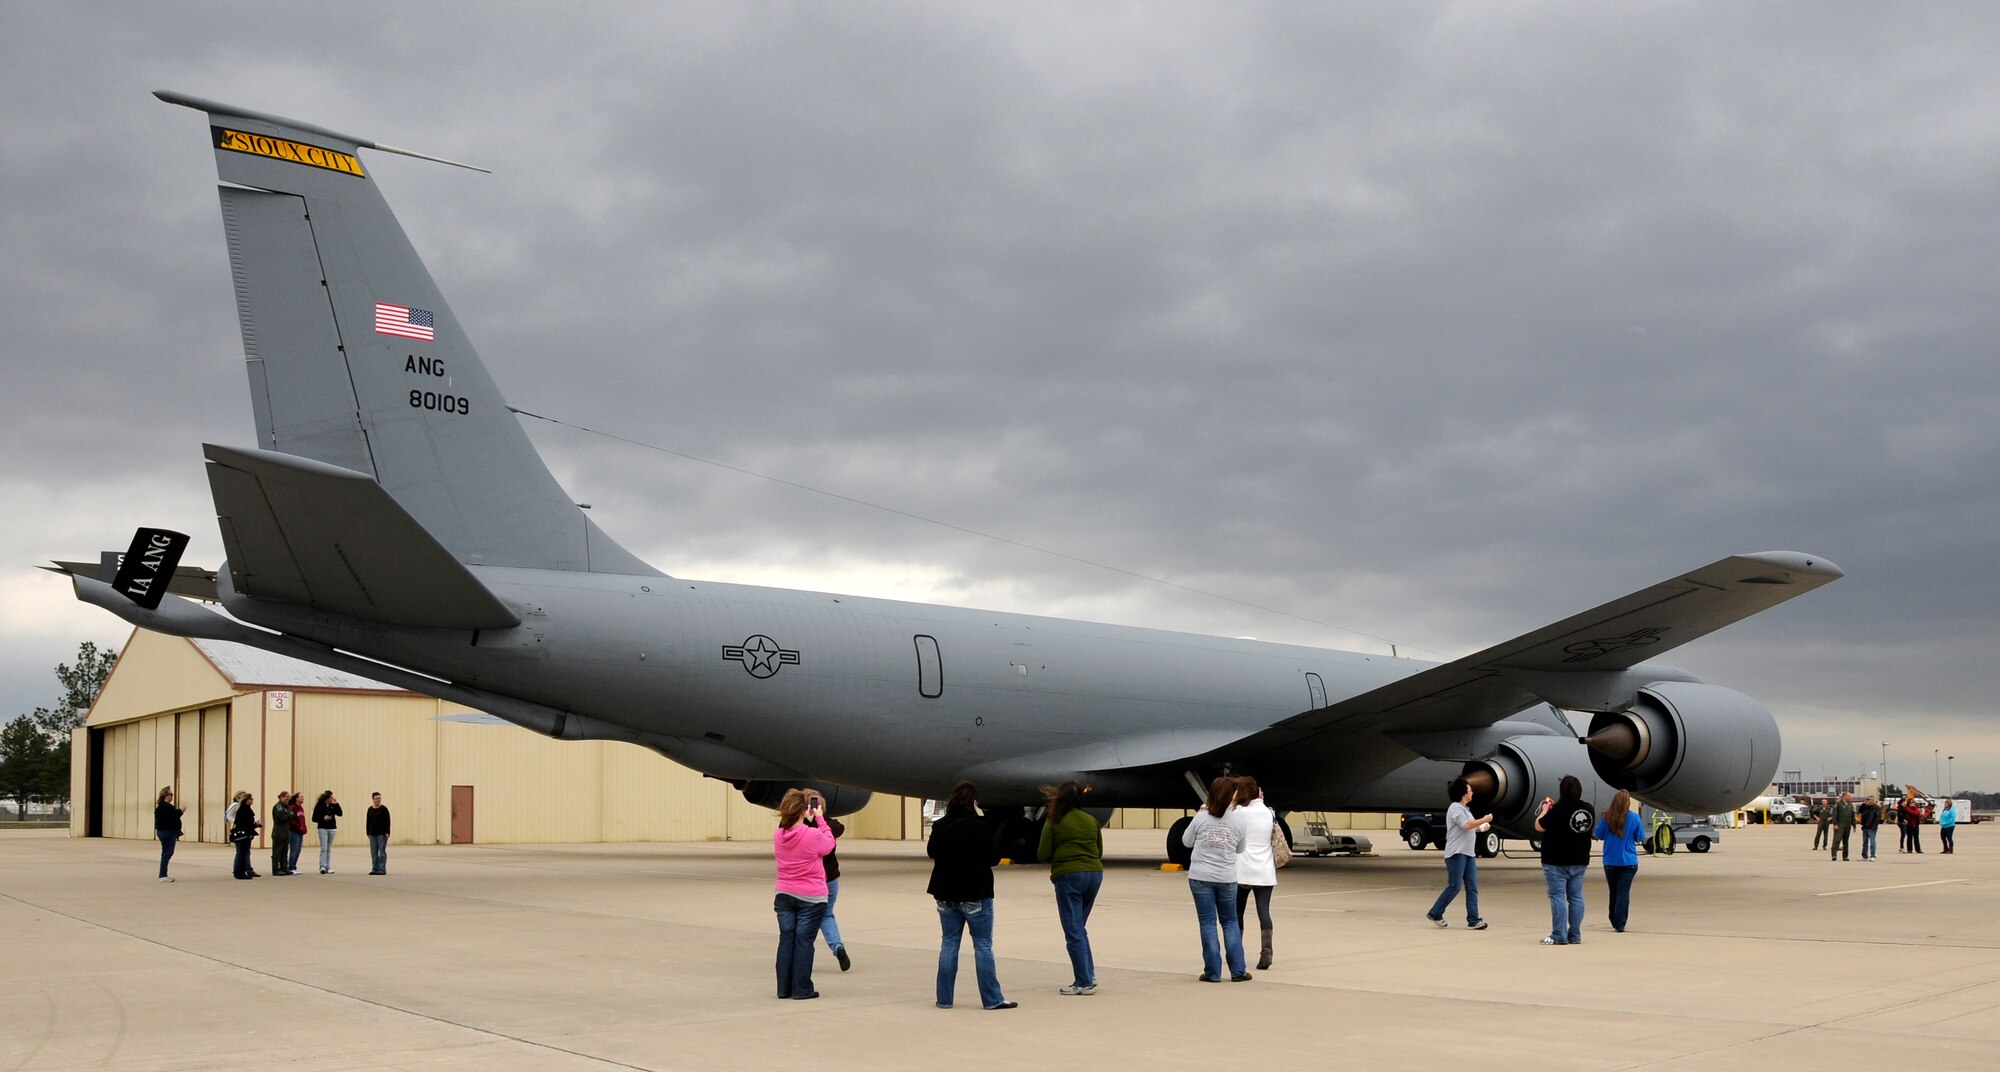 The 188th Fighter Wing, Arkansas Air National Guard conducted spouse orientation rides on a KC-135R Stratotanker with the 185th Airlift Wing, Iowa Air National Guard Dec. 2-3, 2011, in Fort Smith, Ark. Spouses of 188th members were able to observe the Flying Razorbacks’ A-10C Thunderbolt II “Warthogs” conduct aerial refueling from the KC-135R's boom operation area during the flight. The flight was part of an open house in which 188th family members were afforded the opportunity to fly an A-10 simulator as well as observe A-10 training exercises at the 188th’s Detachment 1 Razorback Range located at Fort Chaffee Maneuver Training Center, Ark. The objective of the program was to showcase the 188th’s mission to family members. (U.S. Air Force photo by Airman 1st Class Hannah Landeros/188th Fighter Wing Public Affairs) 